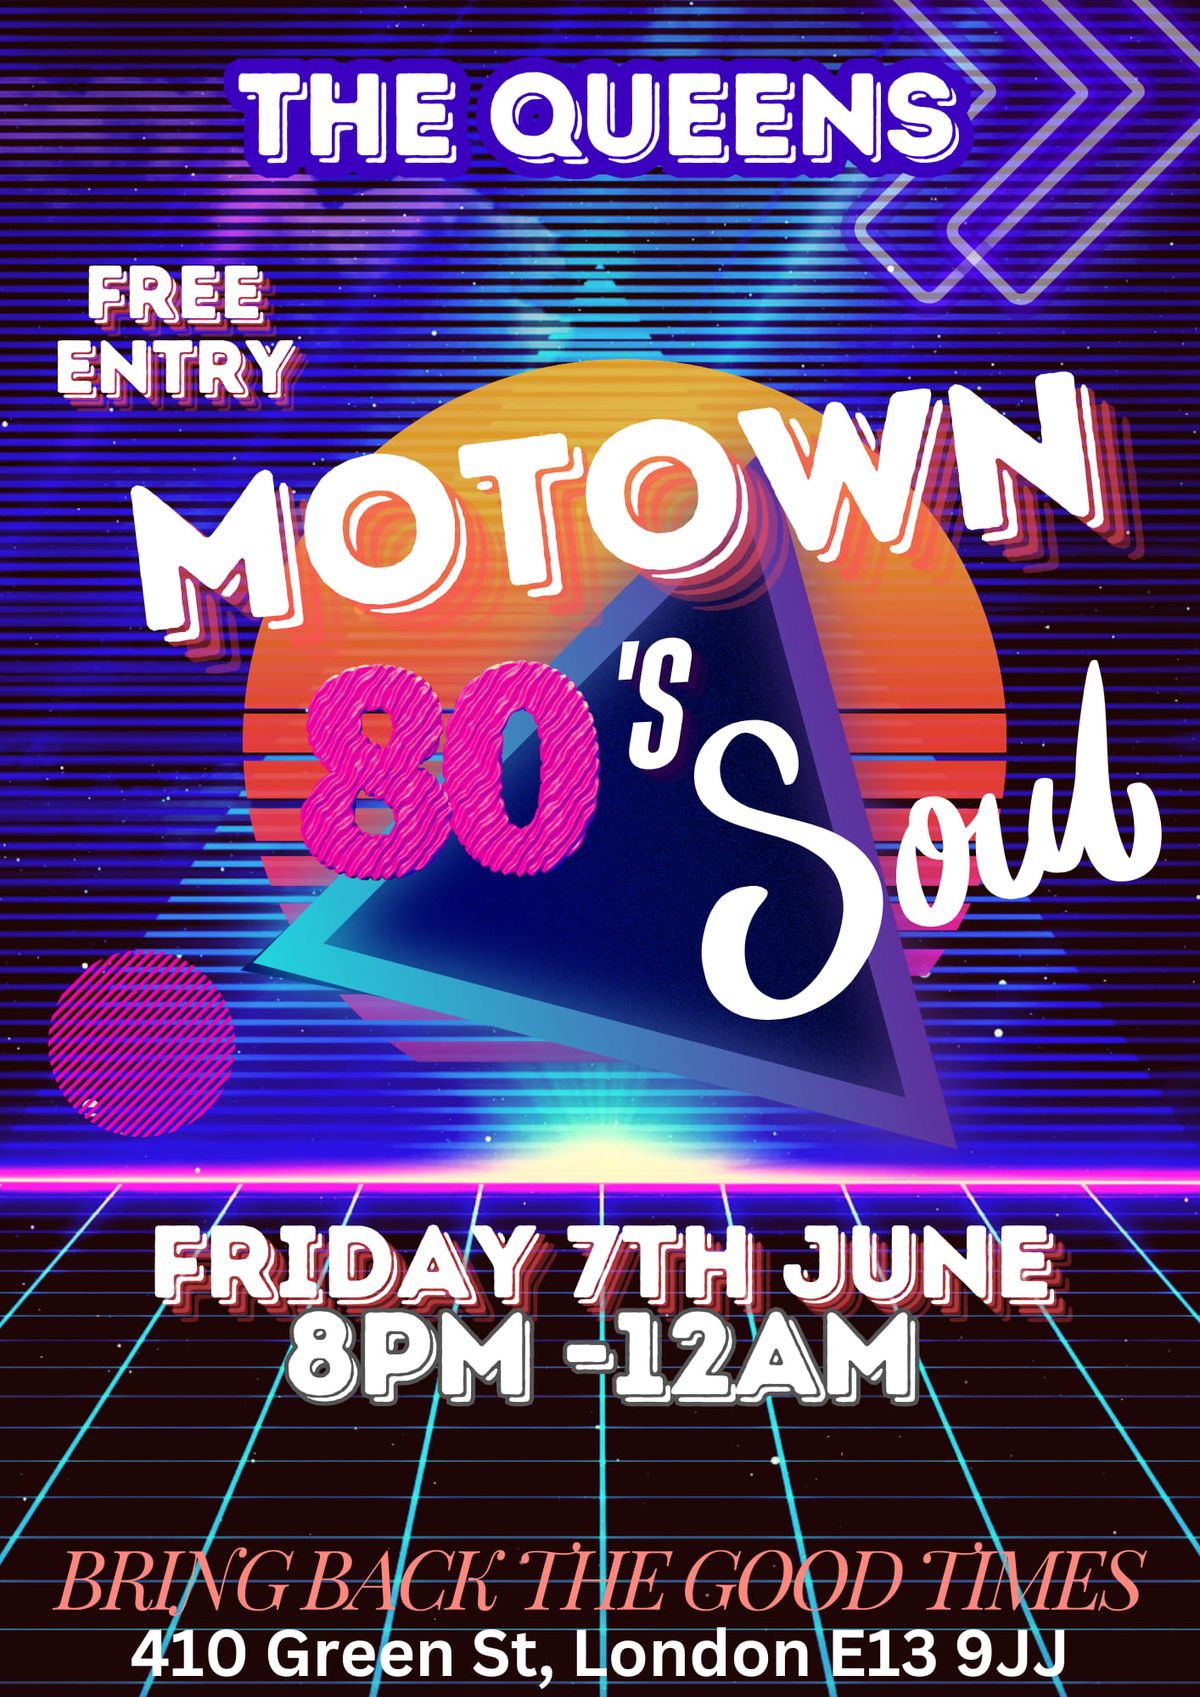 Motown soul and 80s night @ the queens upton park 